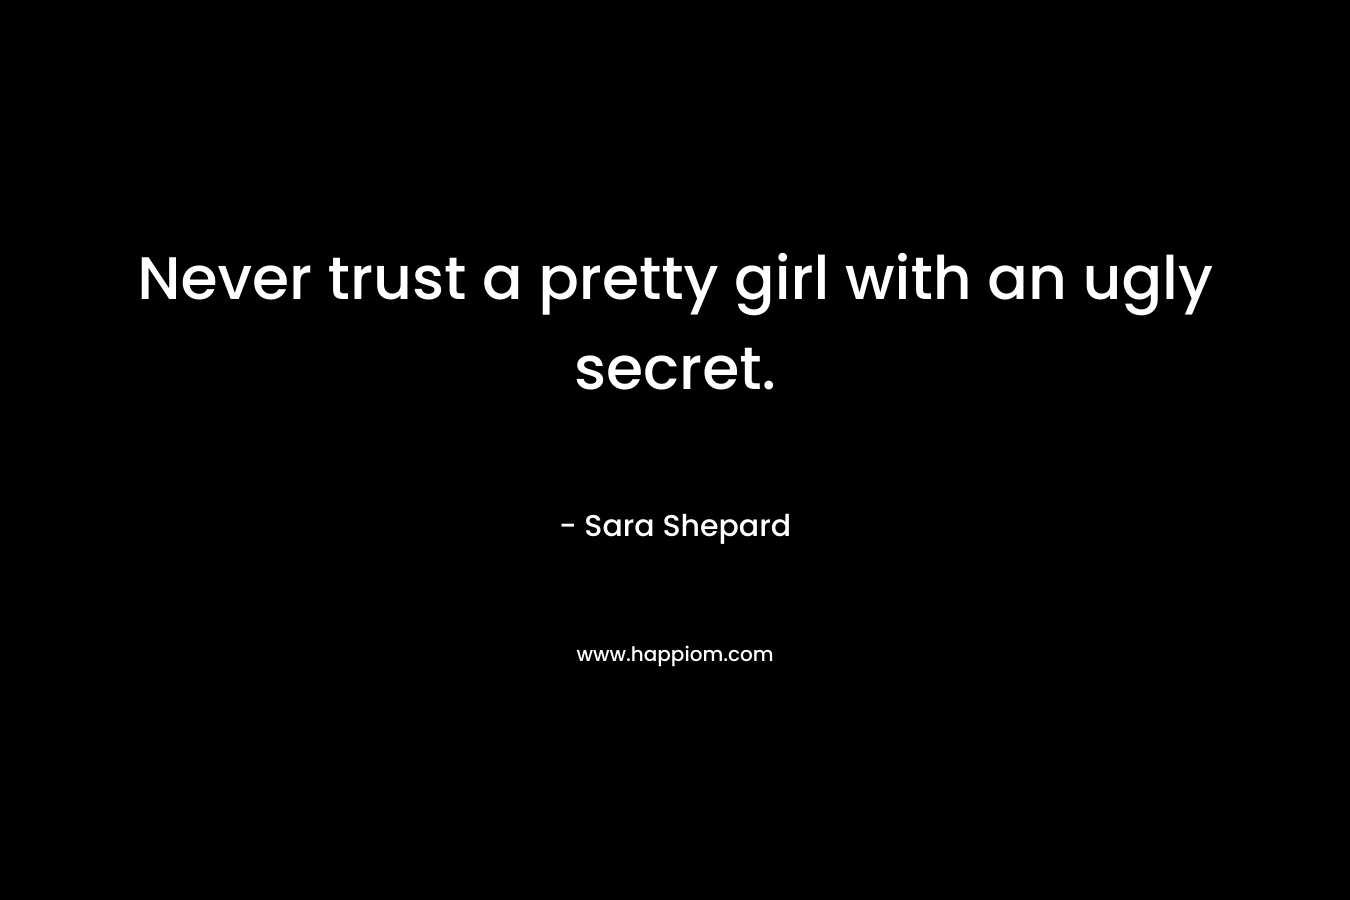 Never trust a pretty girl with an ugly secret.